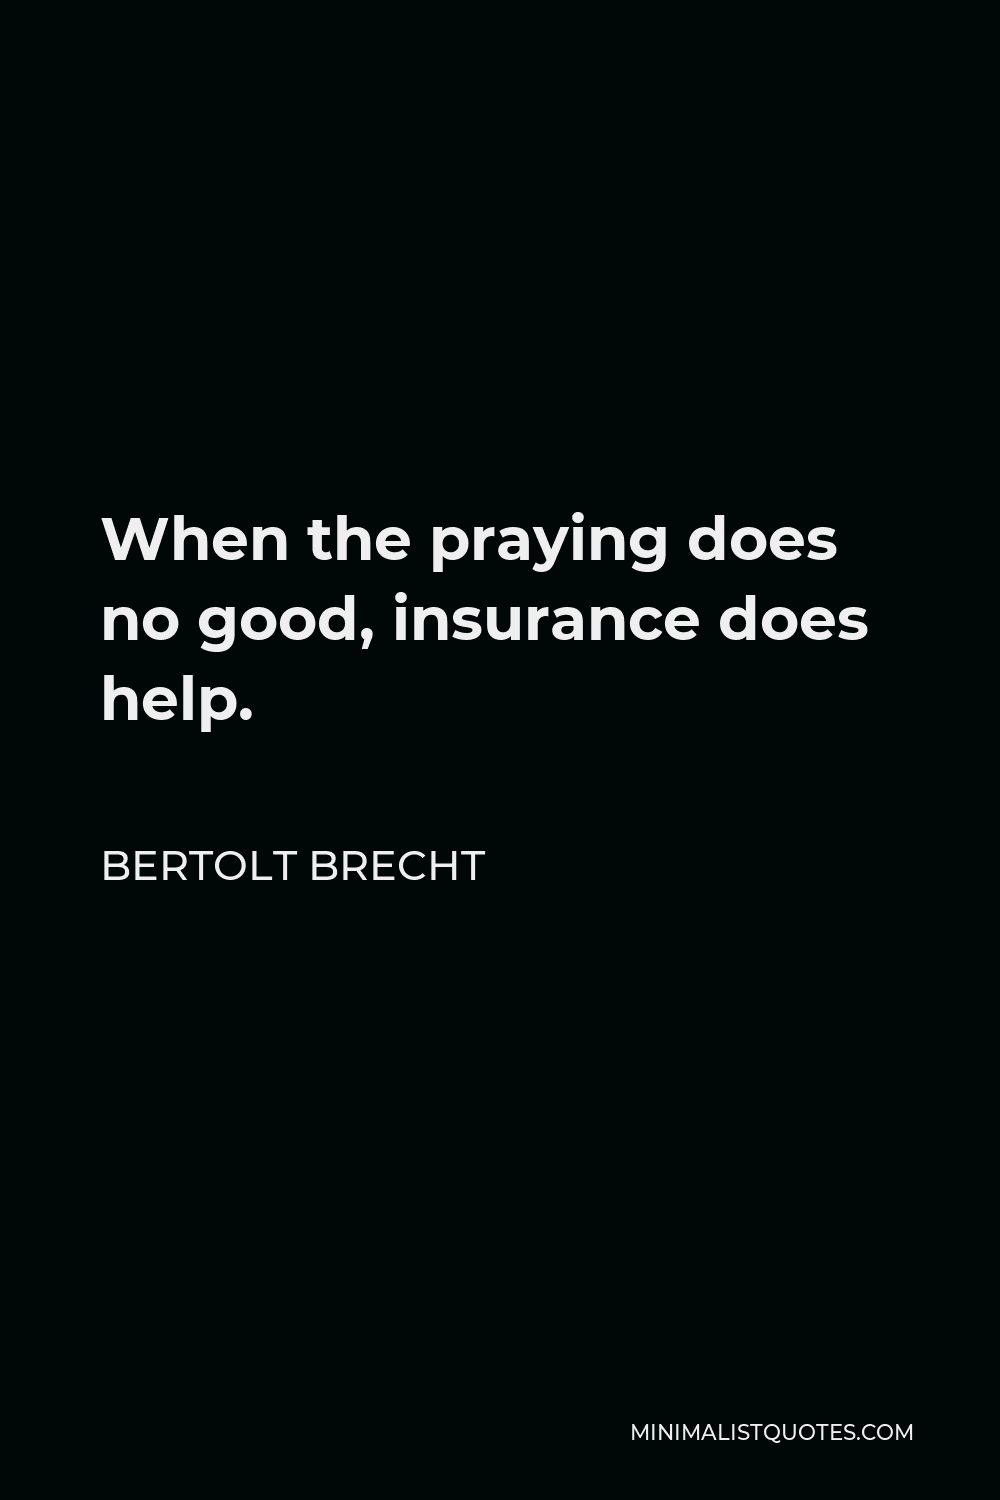 Bertolt Brecht Quote - When the praying does no good, insurance does help.